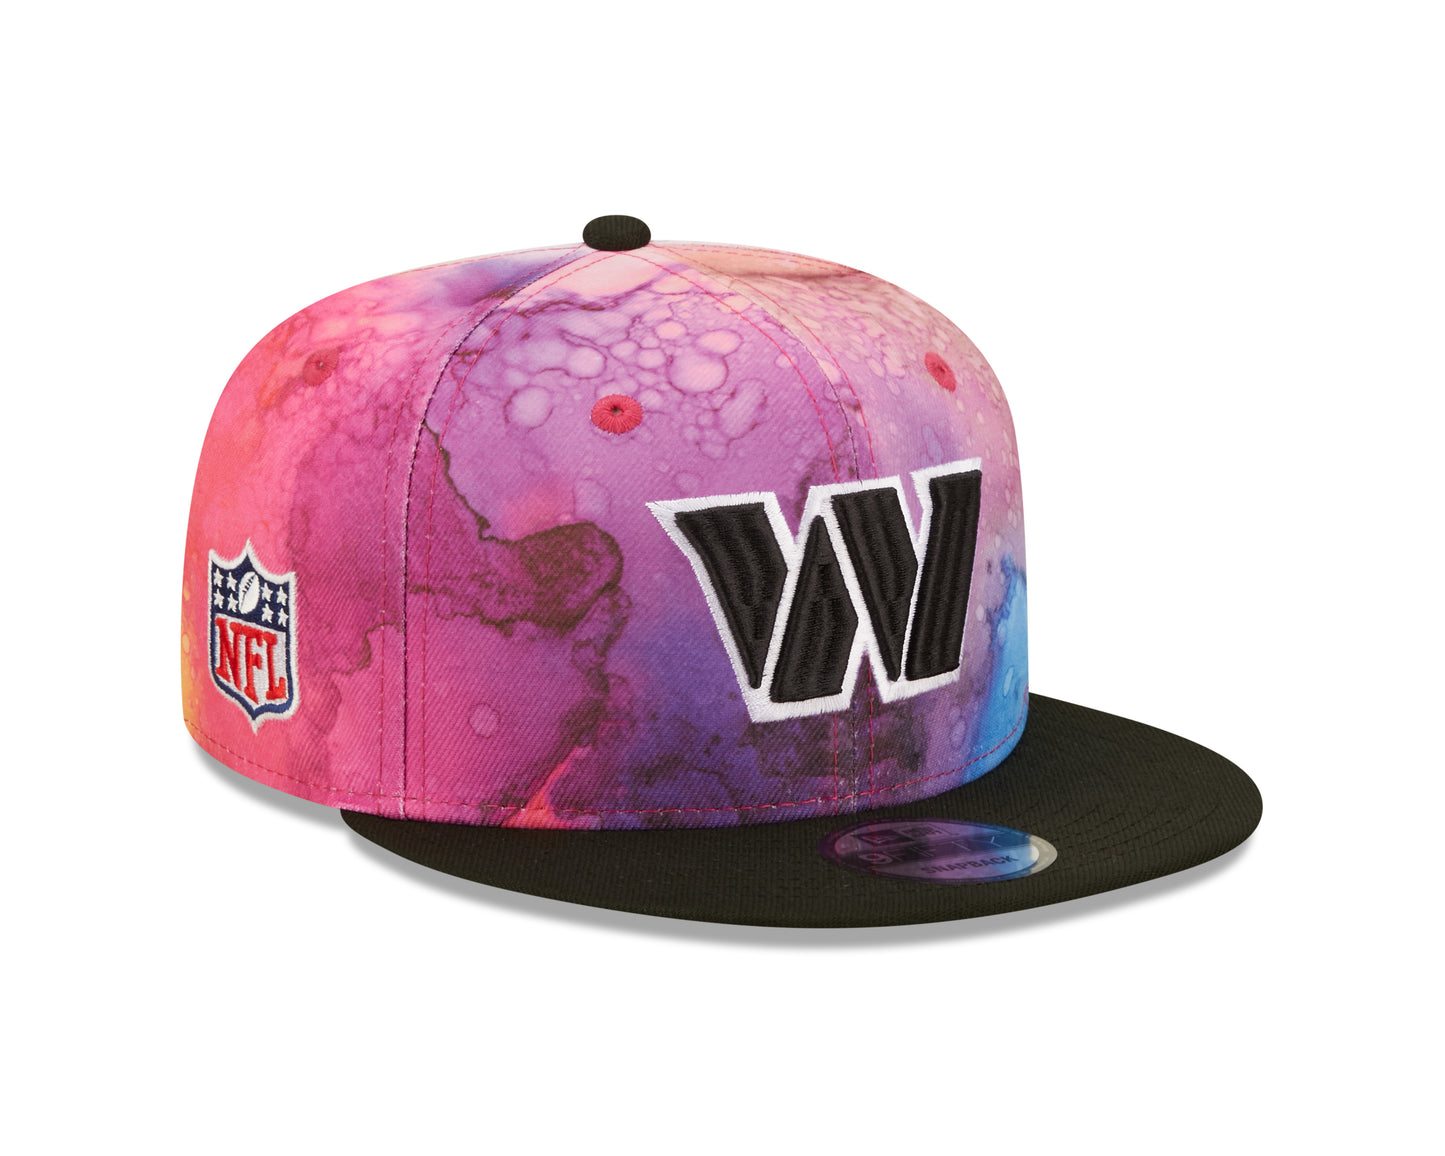 Washington Commanders New Era Sideline Crucial Catch 9Fifty Hat- Ink Pink